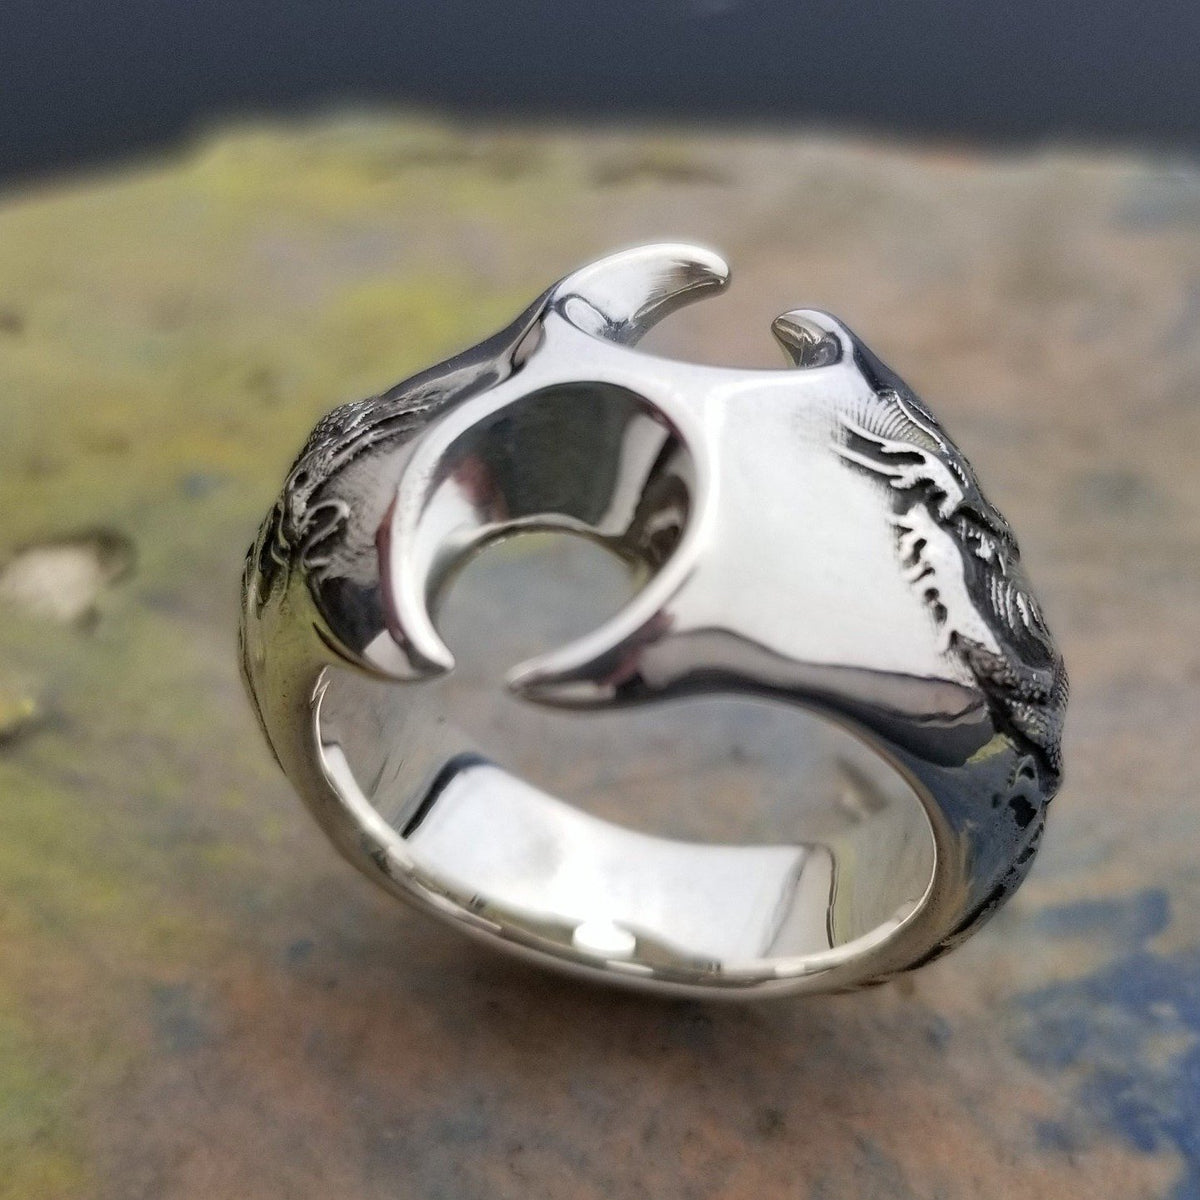 Double dragon ring